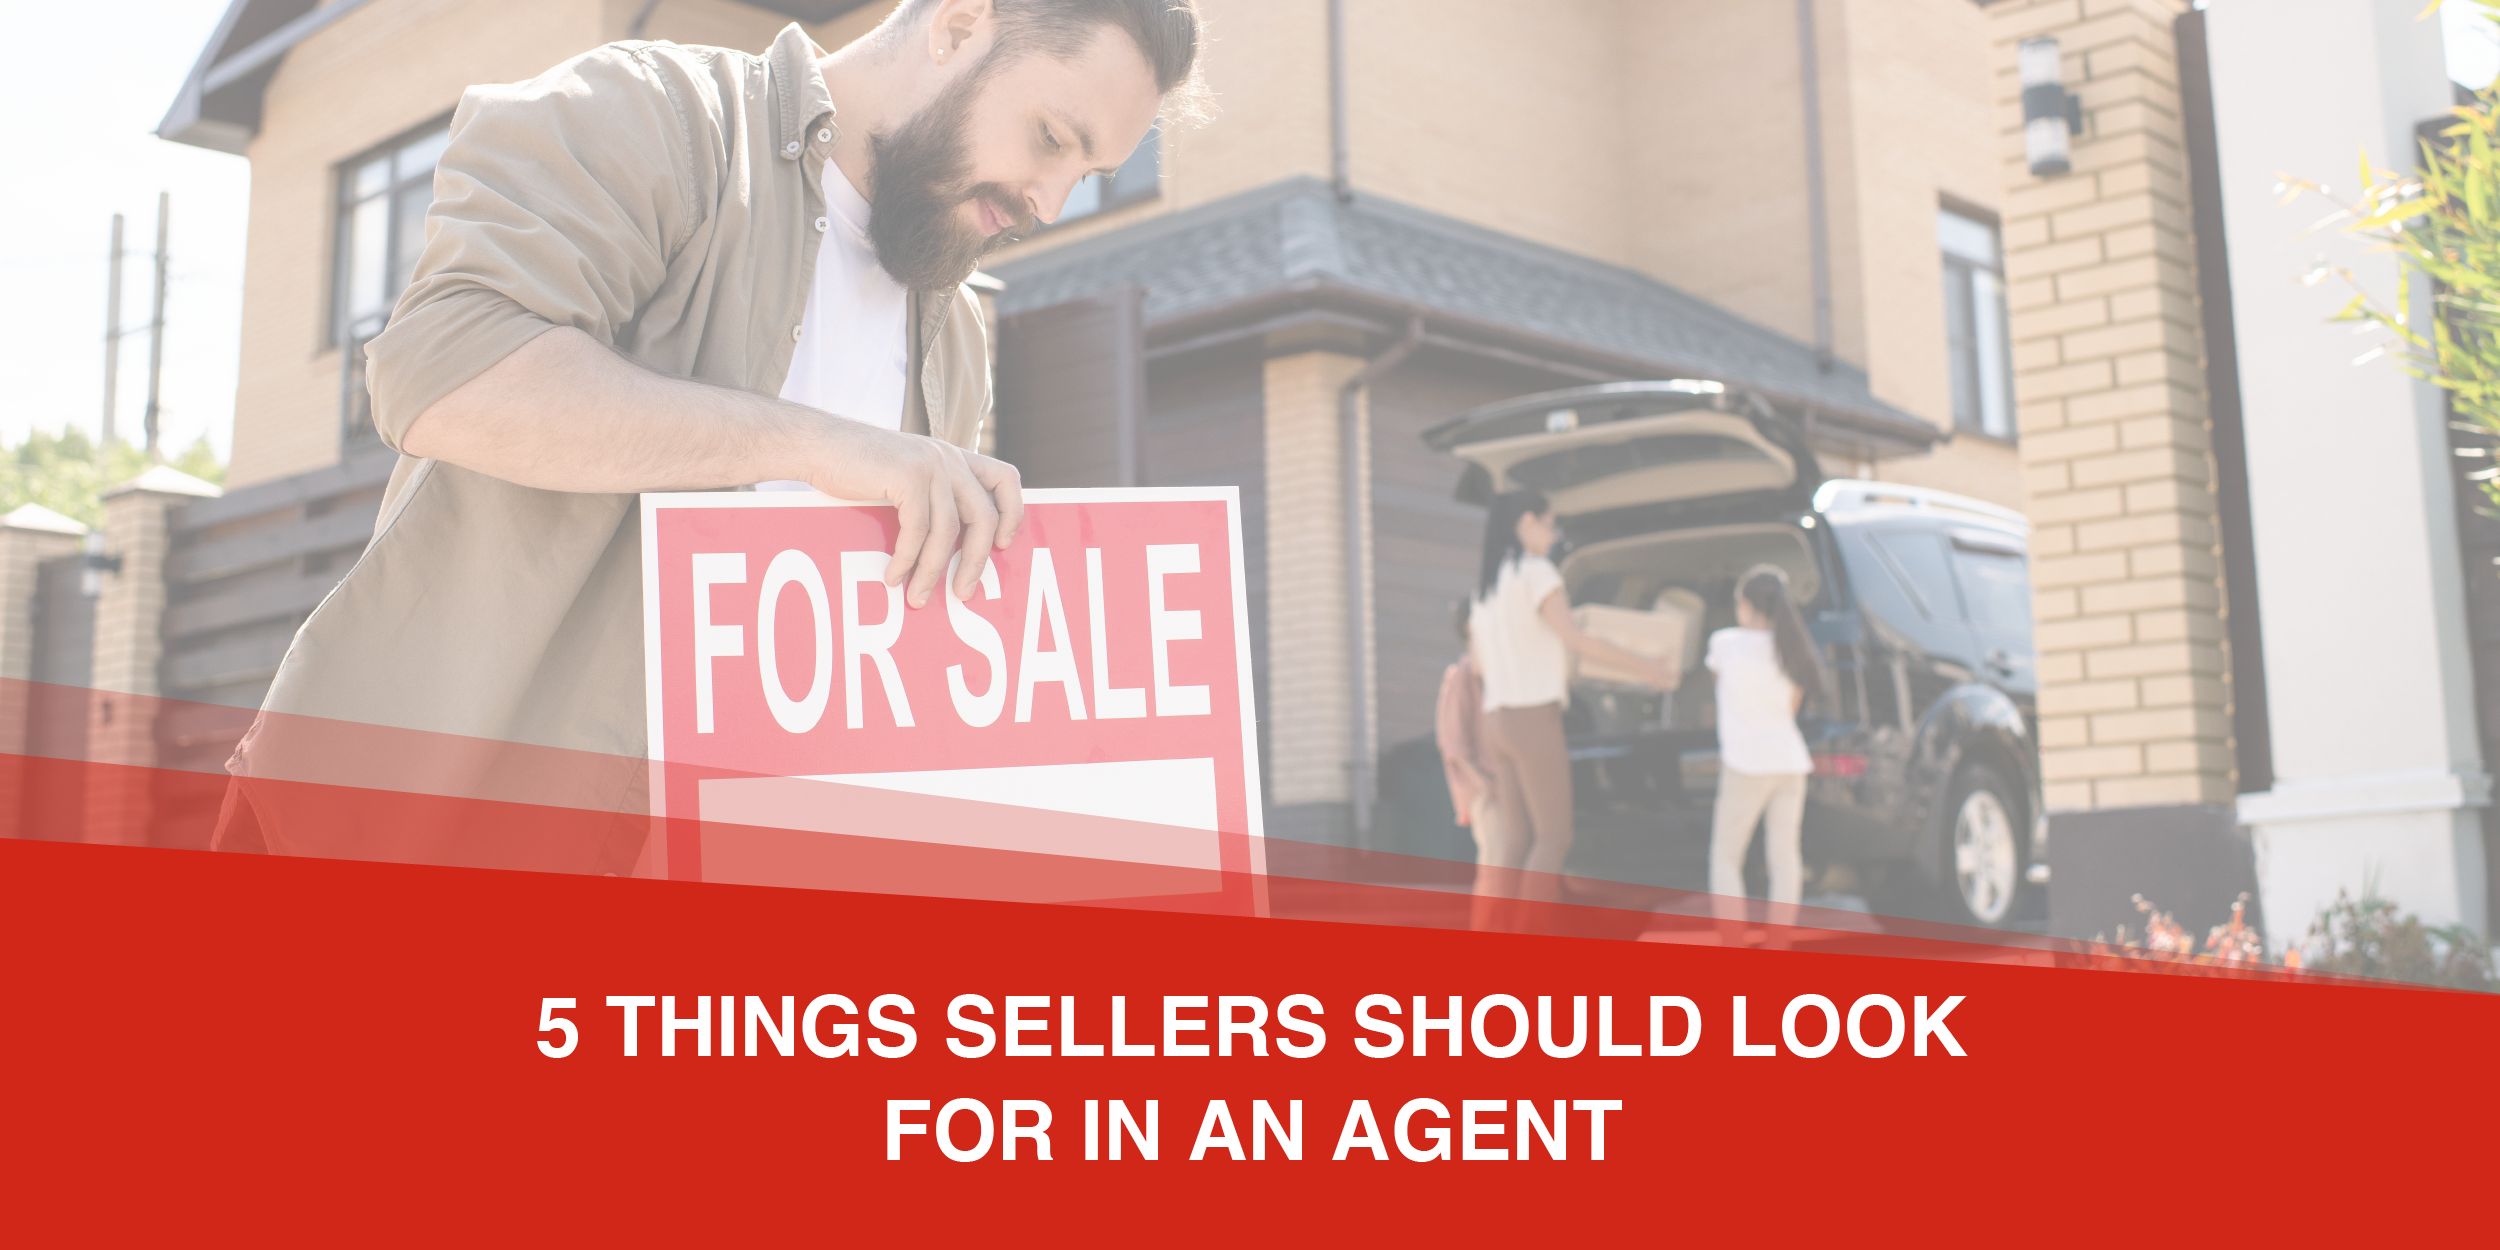 5 Things Sellers Should Look for in an Agent